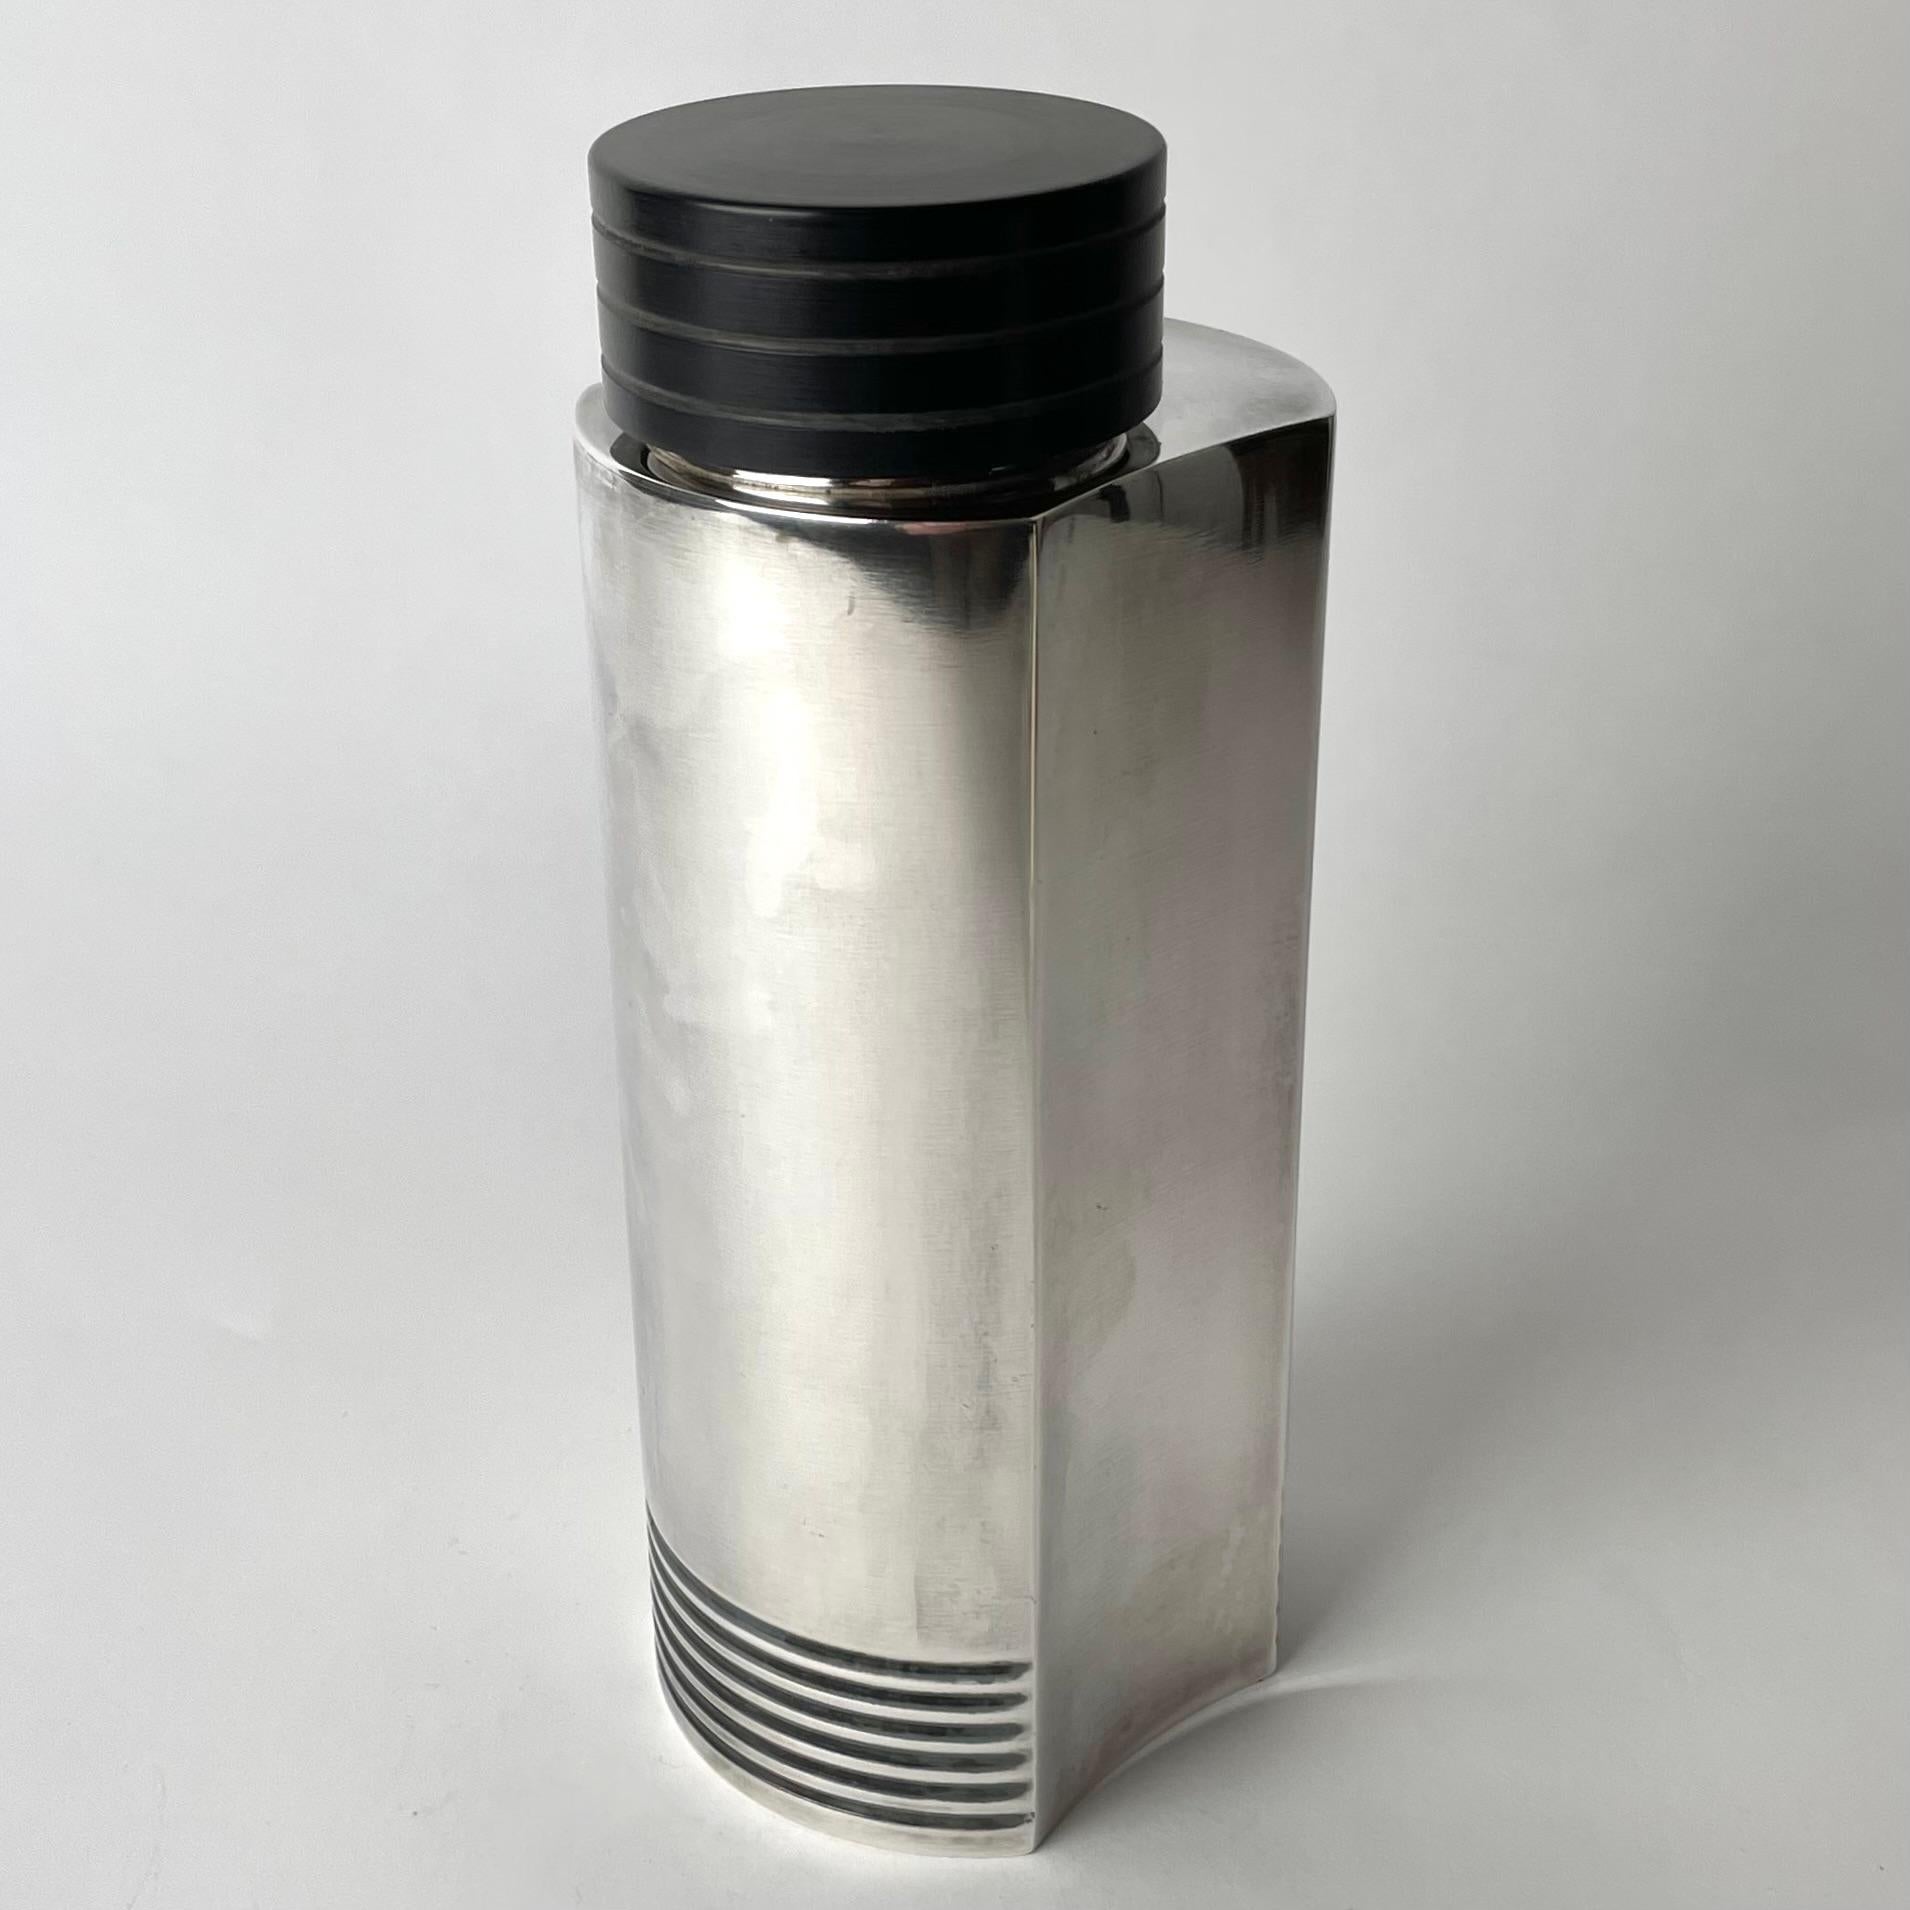 Very Elegant Art Deco Cocktail Shaker designed by the famous designer Folke Arström in 1935 for GAB (Guldsmedsbolaget) in Sweden. The shaker is silver plated with details in bakelite. Period Art Deco design.

Wear consistent with age and use 